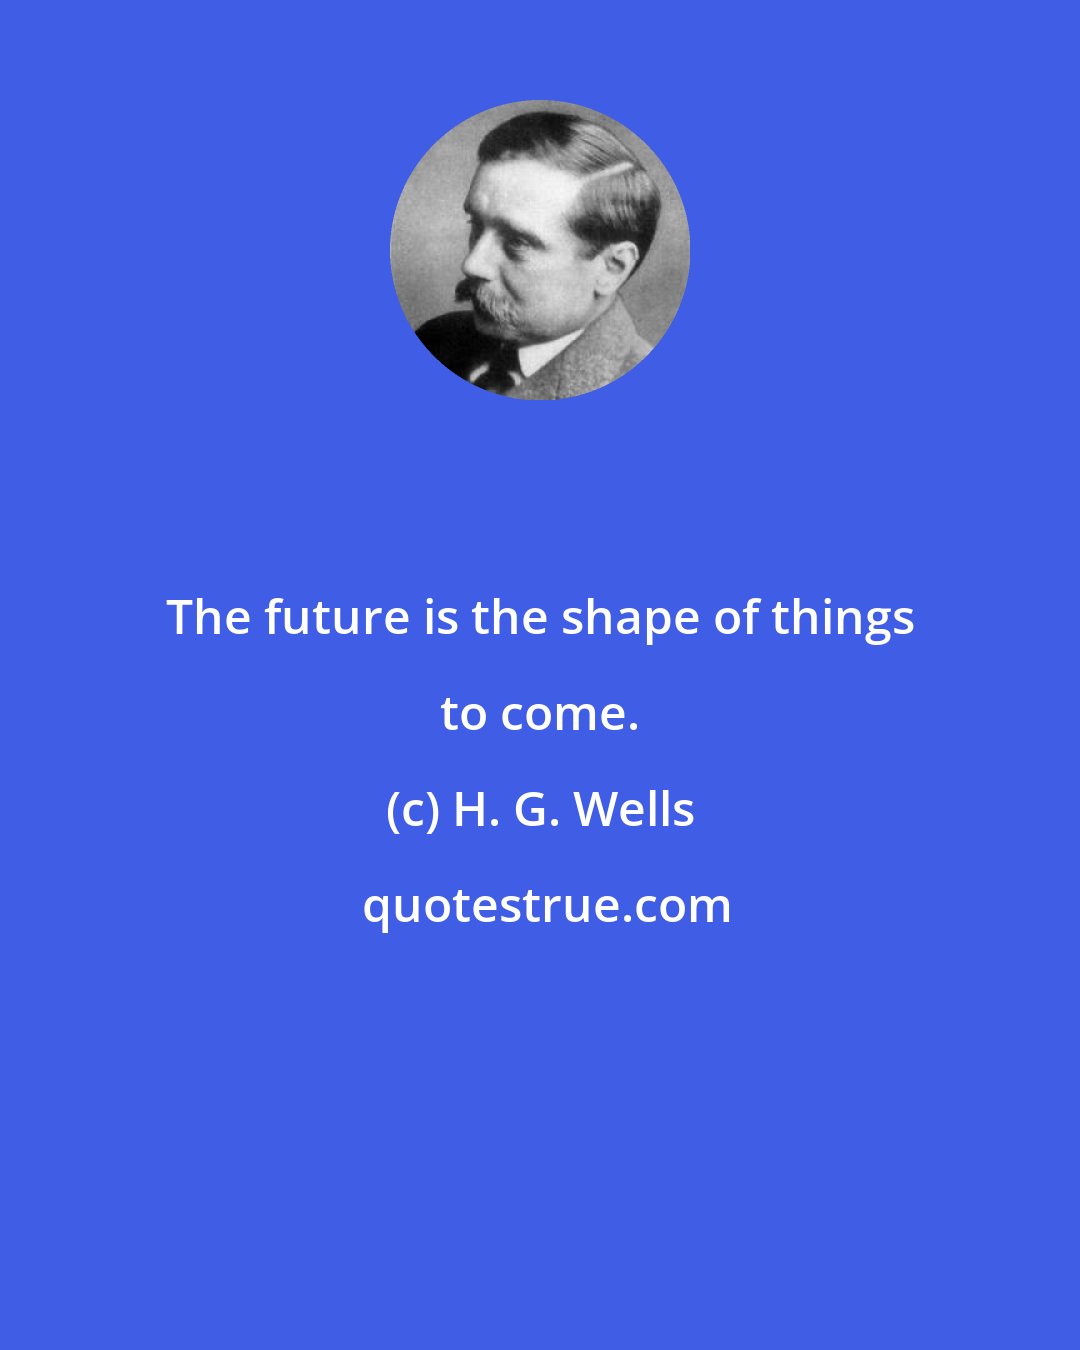 H. G. Wells: The future is the shape of things to come.